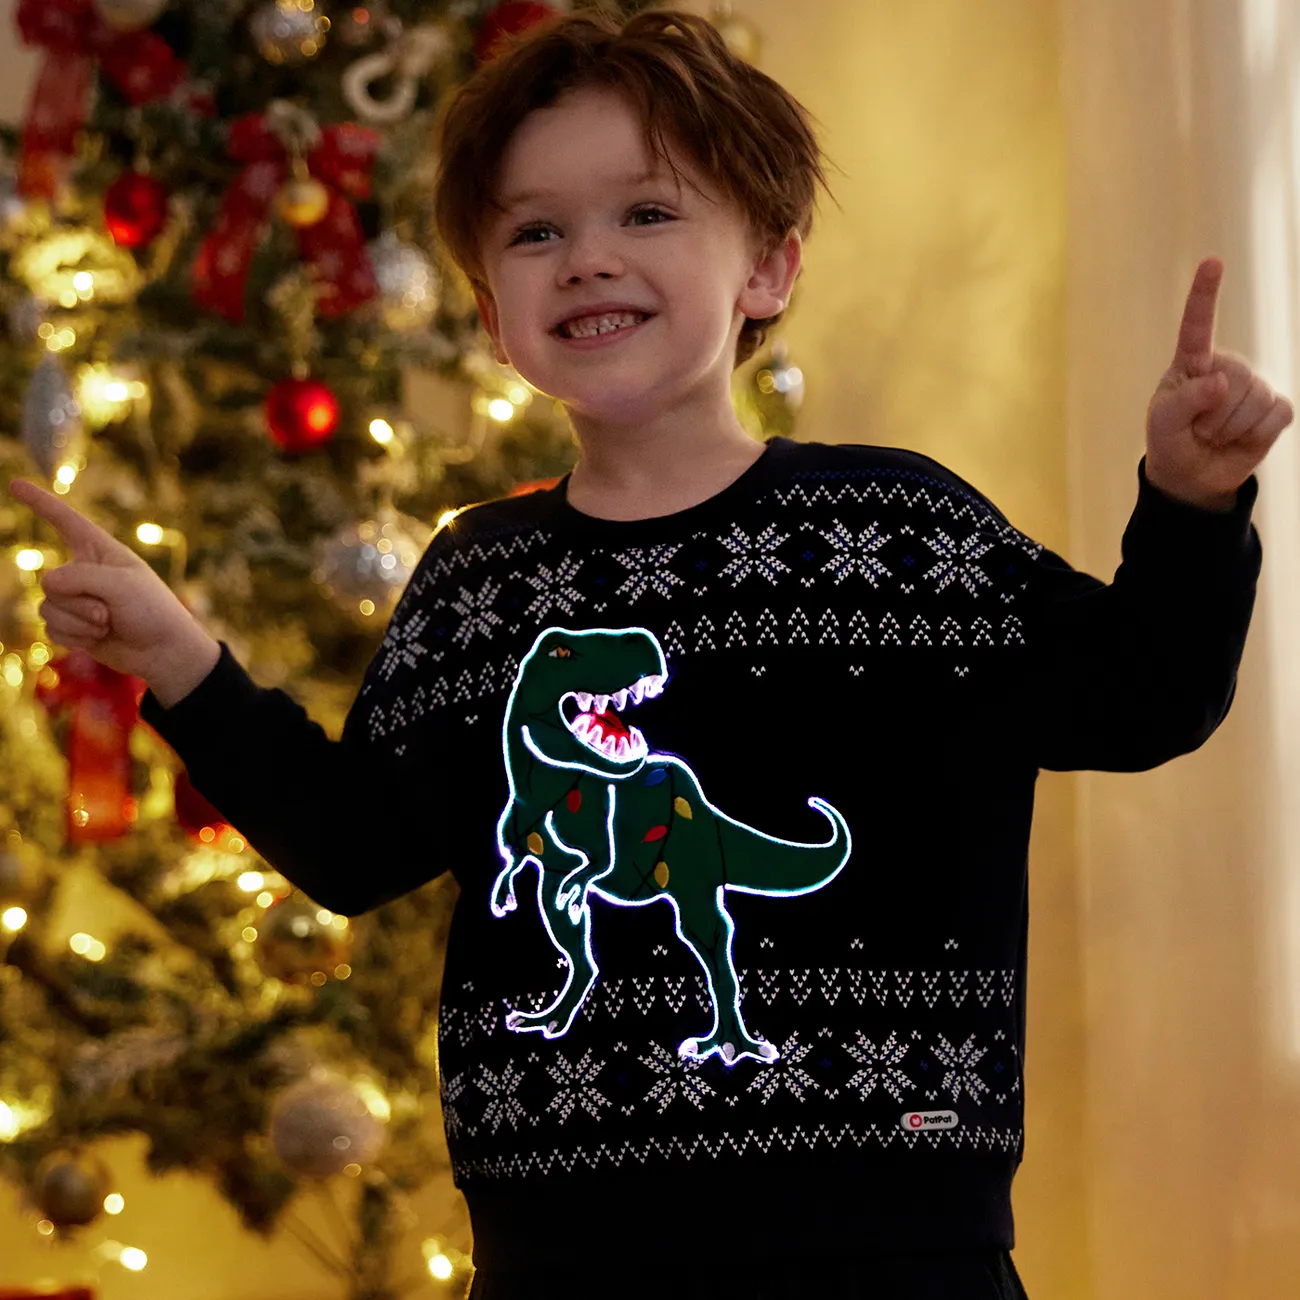 Go-Glow Christmas Illuminating Sweatshirt with Light Up Dragon Including Controller (Built-In Battery) Dark Blue big image 1